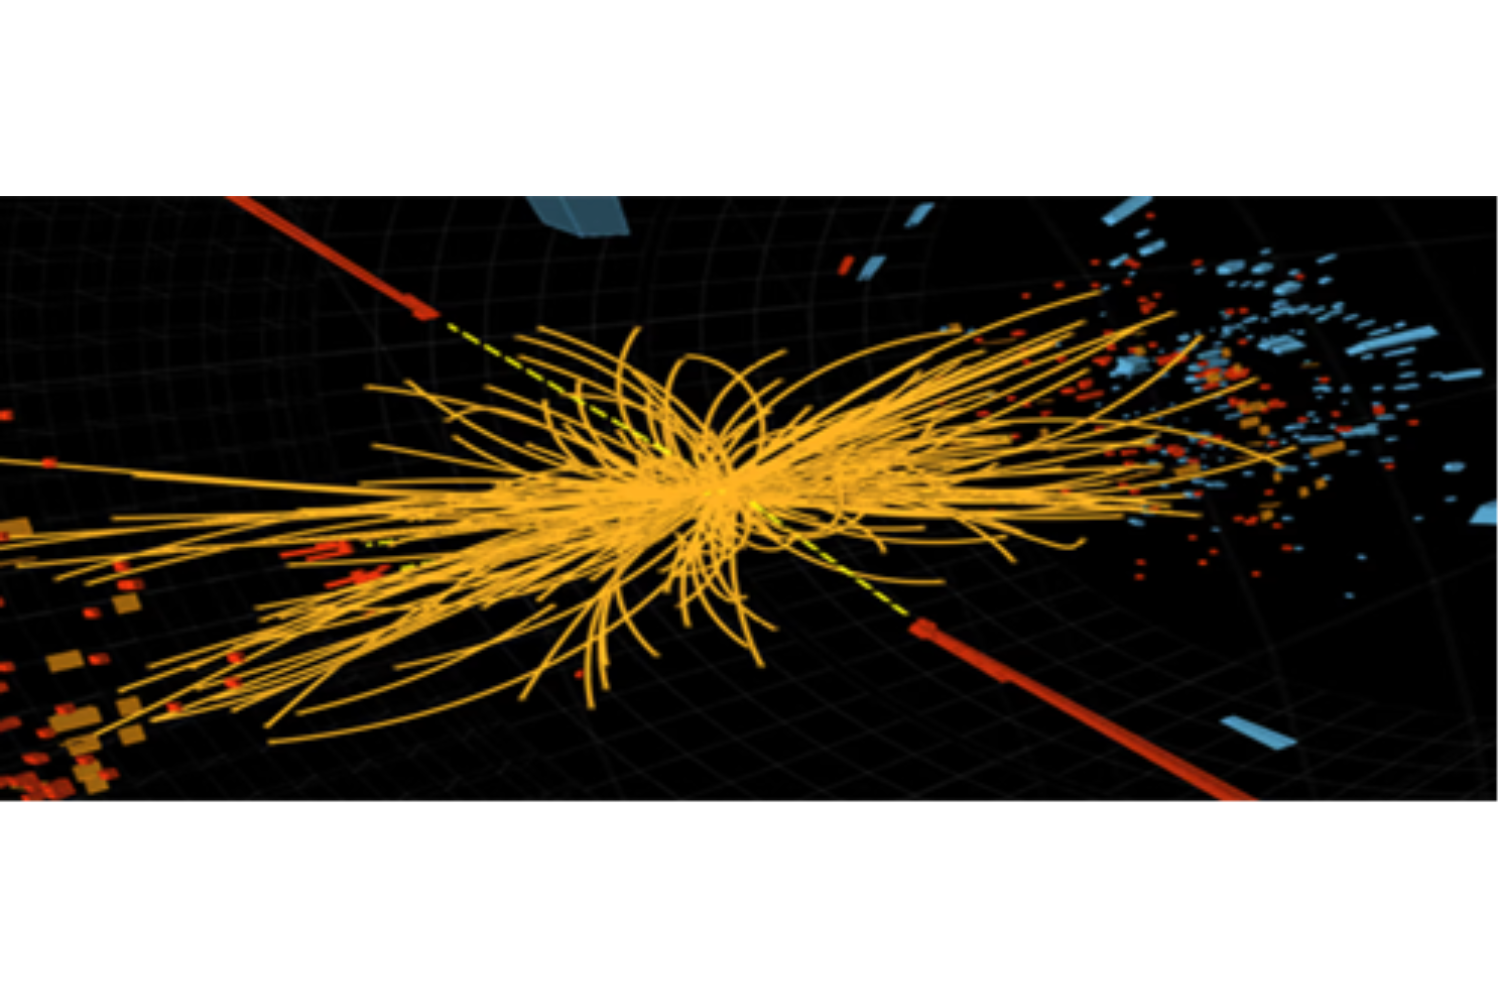 Image of a particle collision at CERN